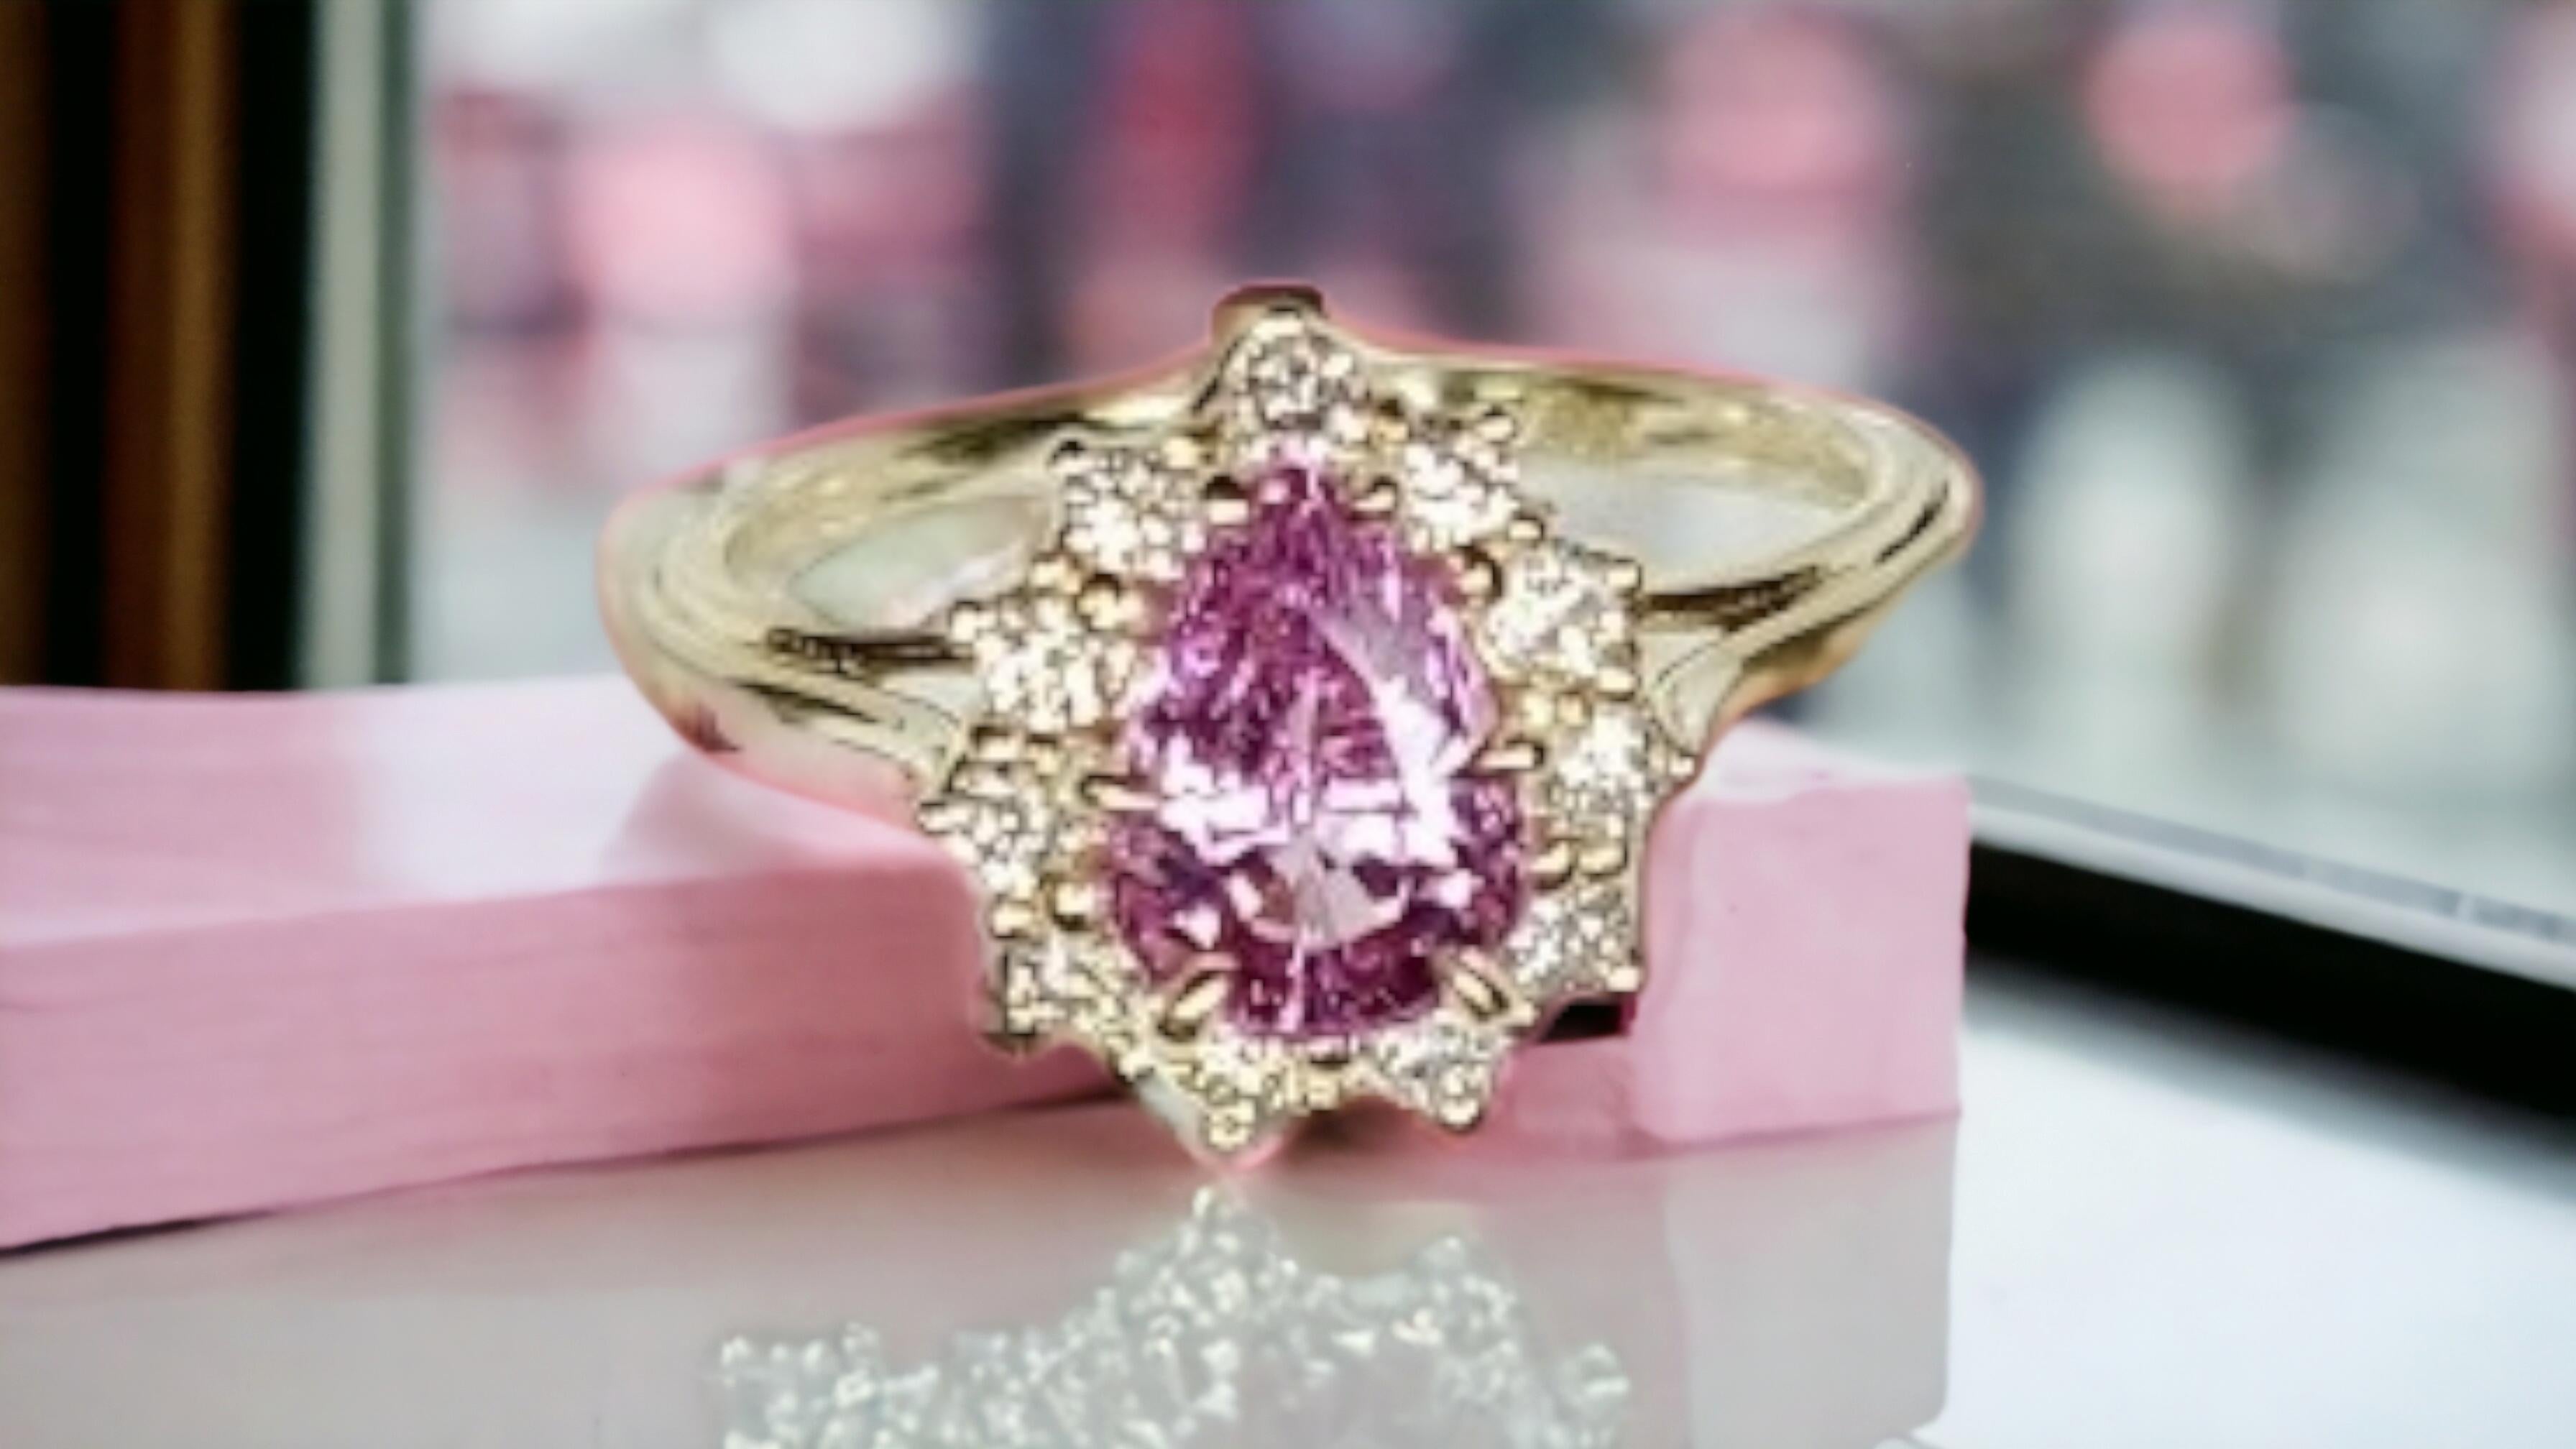 New Cert 1.37 ct Unheated Natural Pink Sapphire Diamond Ring in 14k Gold For Sale 6